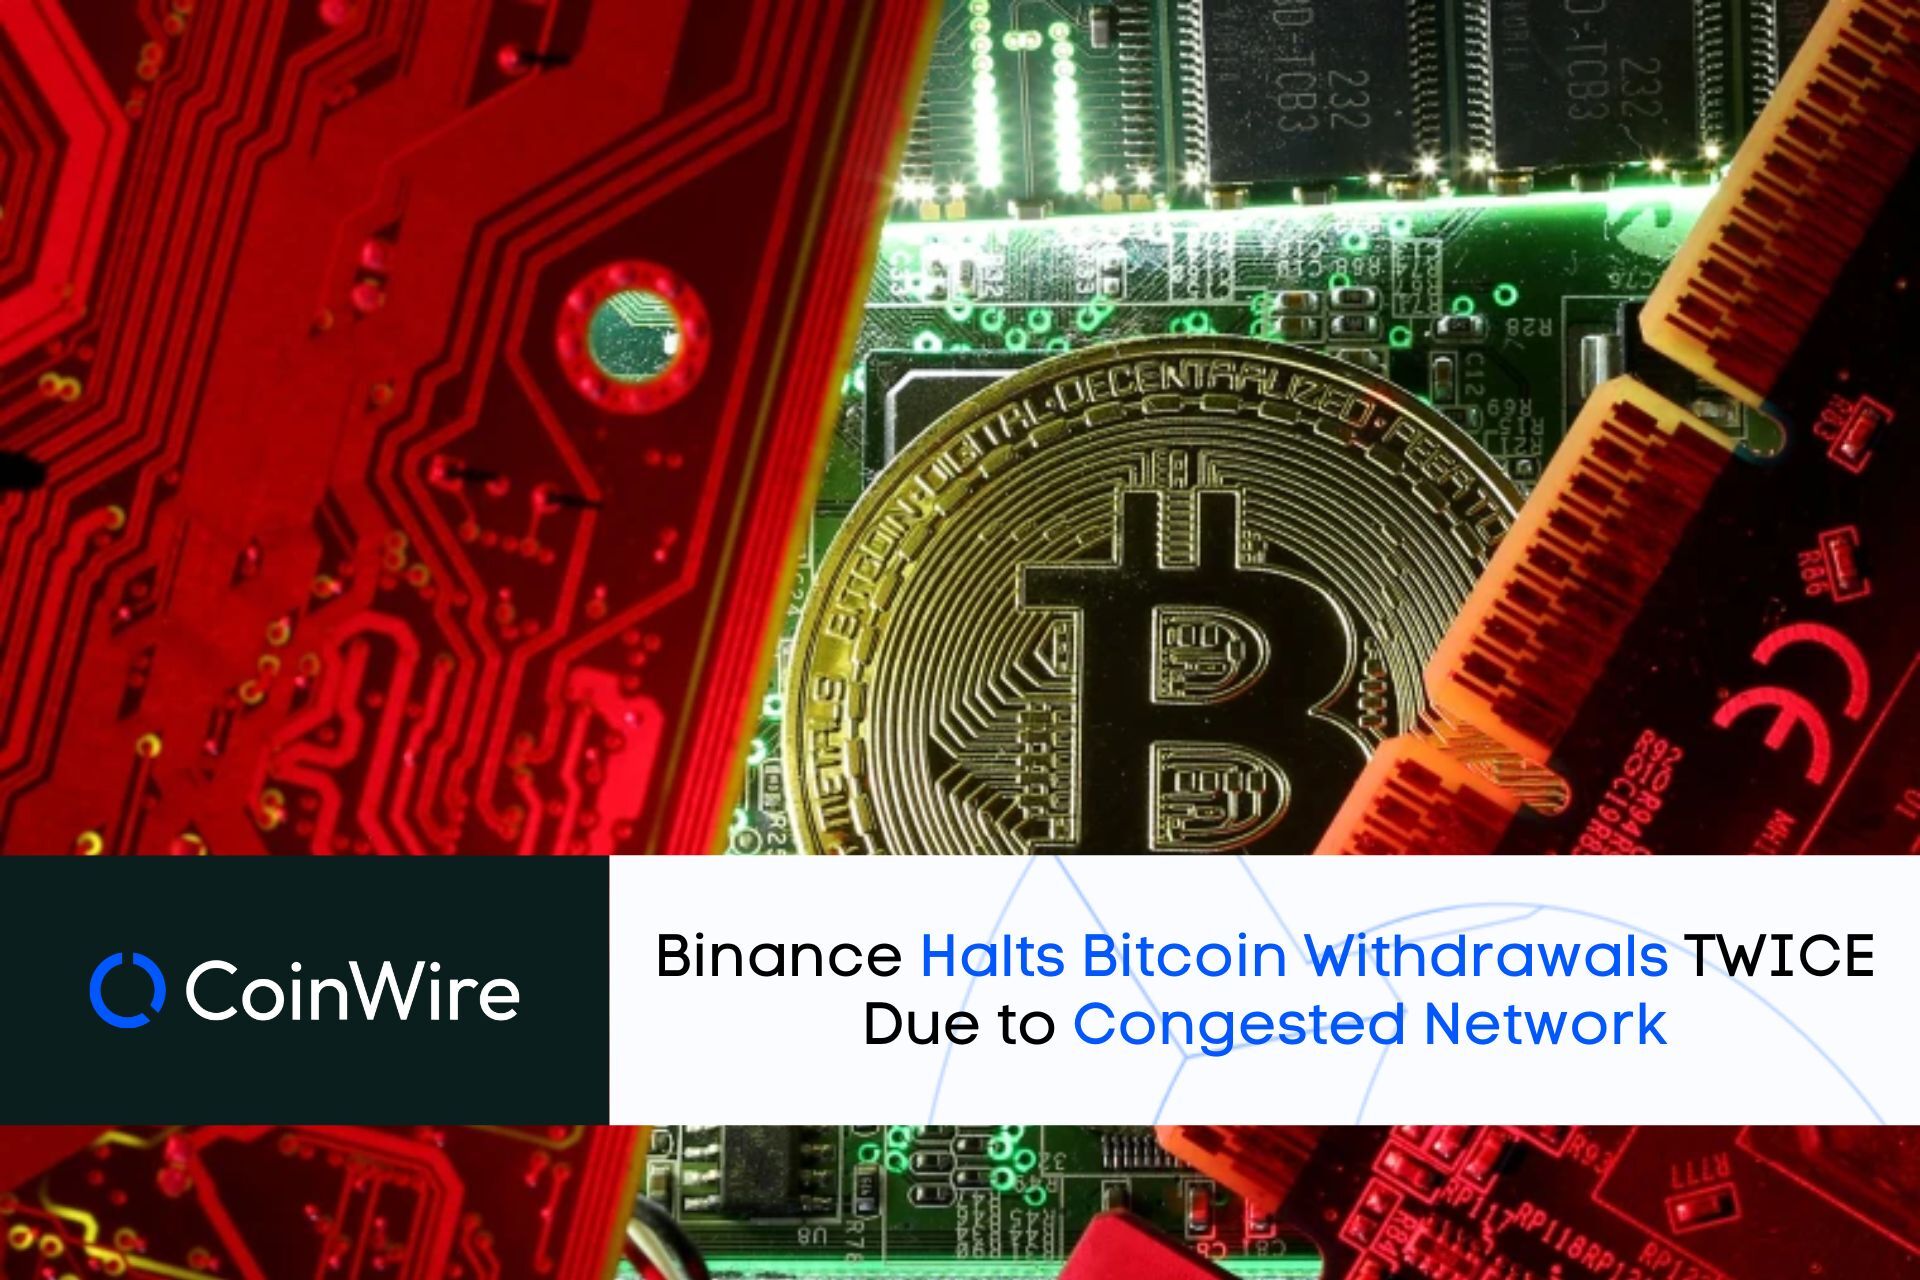 Binance Halts Bitcoin Withdrawals Twice Due To Congested Network